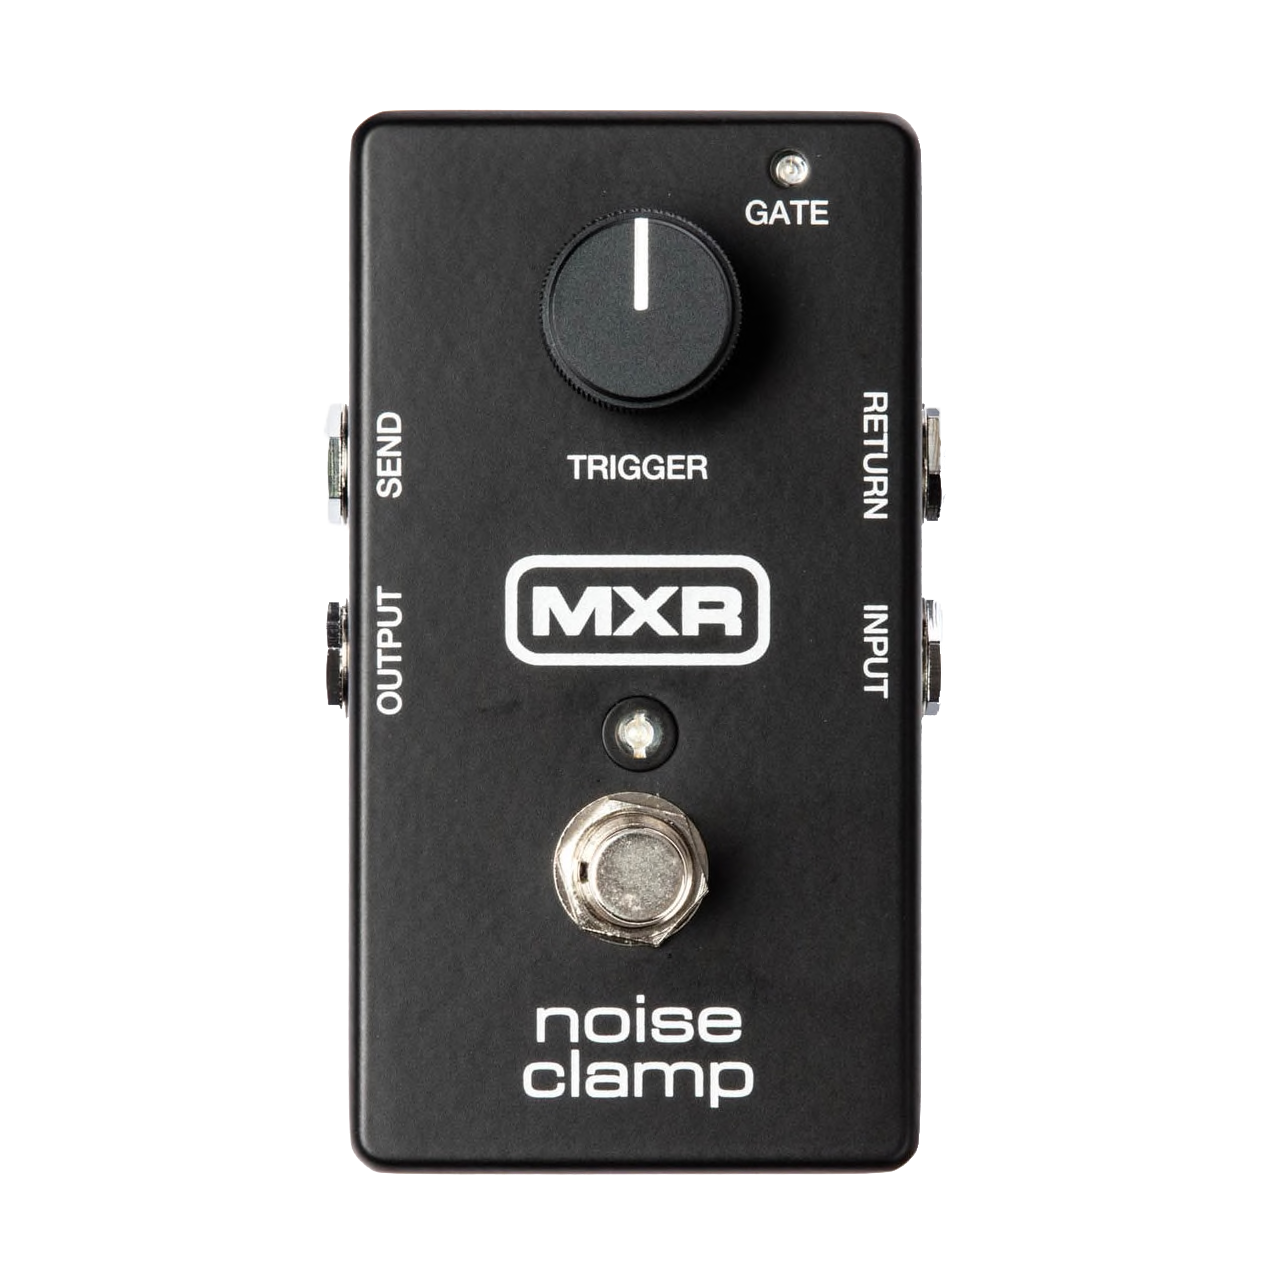 Top down of MXR M195 Noise Clamp Noise Reduction/Gate Pedal.